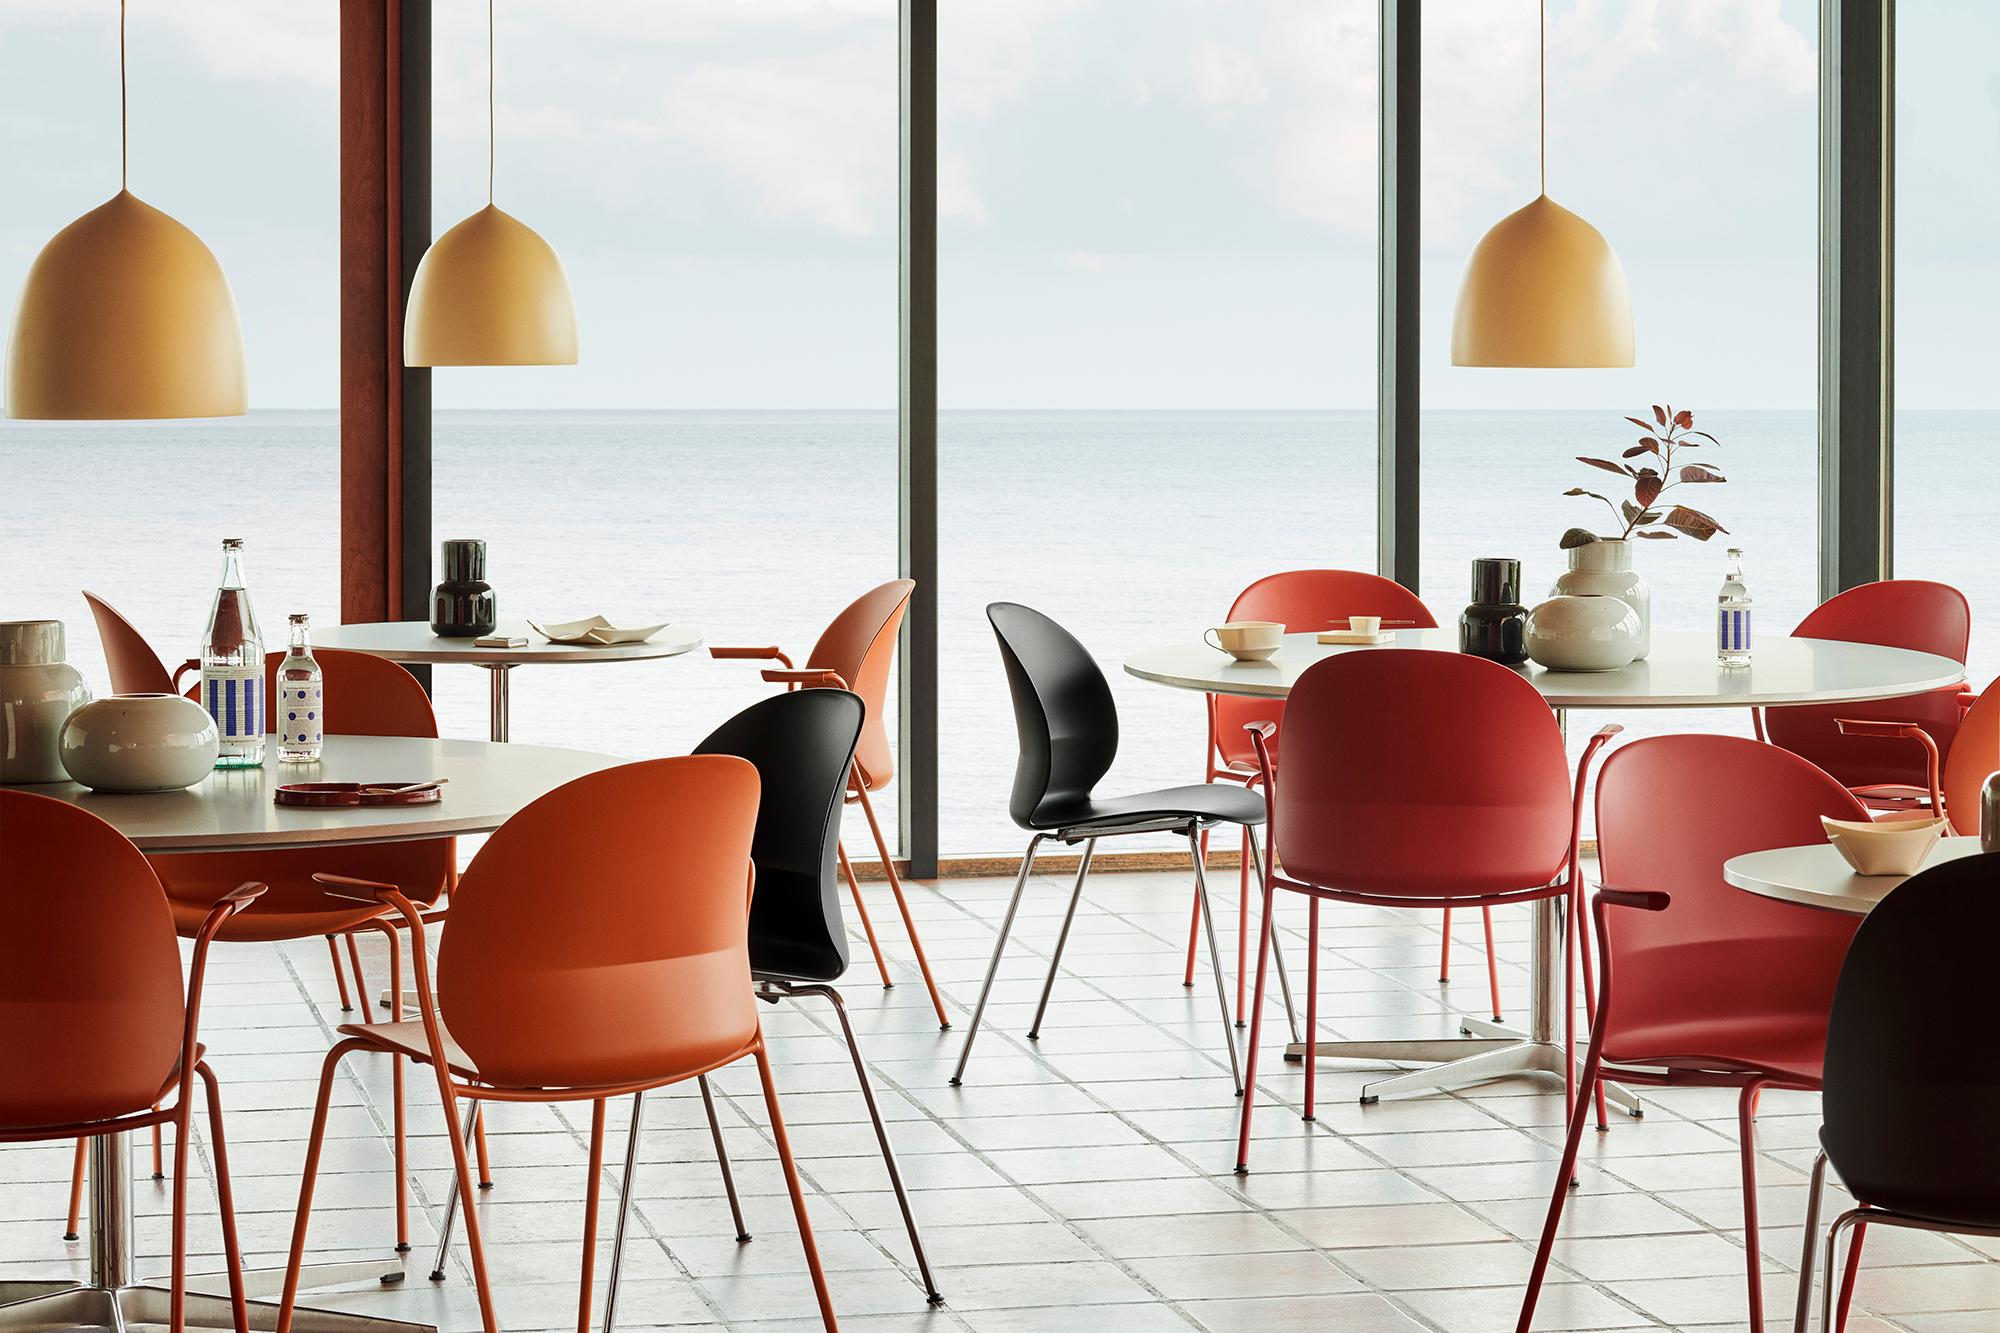 GamFratesi 'Suspence P1.5' Pendant Lamp for Fritz Hansen in Pale Pearl.

Established in 1872, Fritz Hansen has become synonymous with legendary Danish design. Combining timeless craftsmanship with an emphasis on sustainability, the brand’s